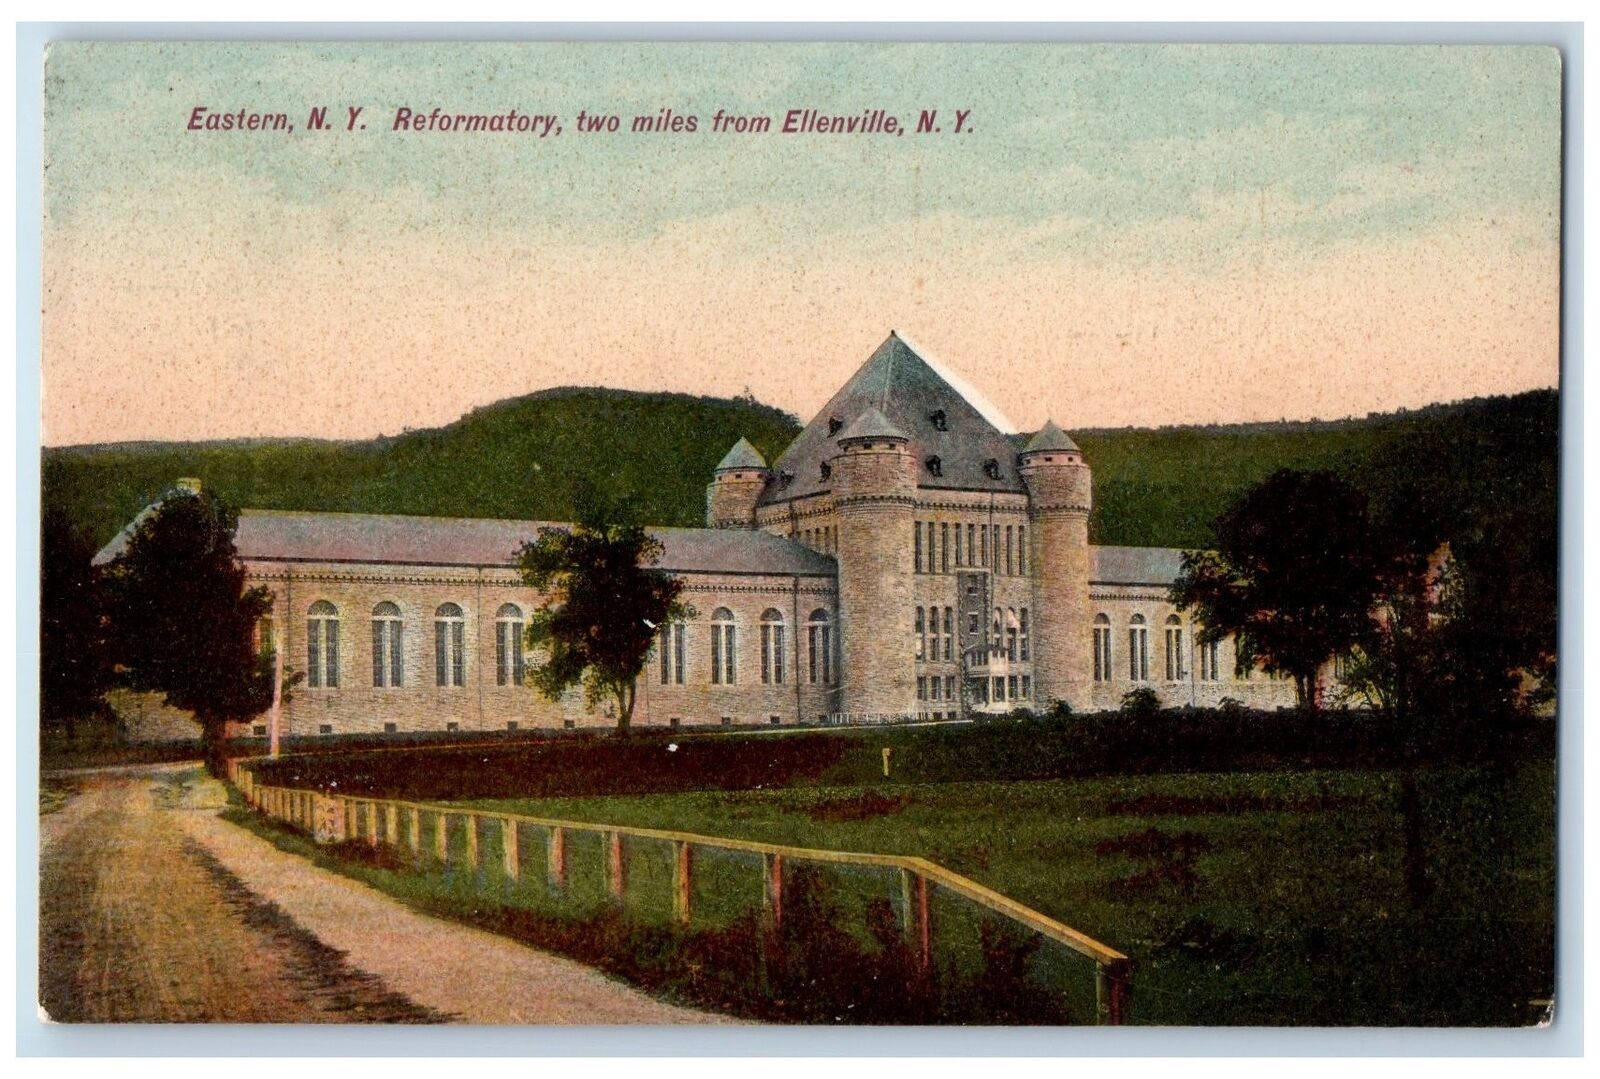 1908 Reformatory Two Miles From Ellenville Eastern NY Posted Vintage Postcard